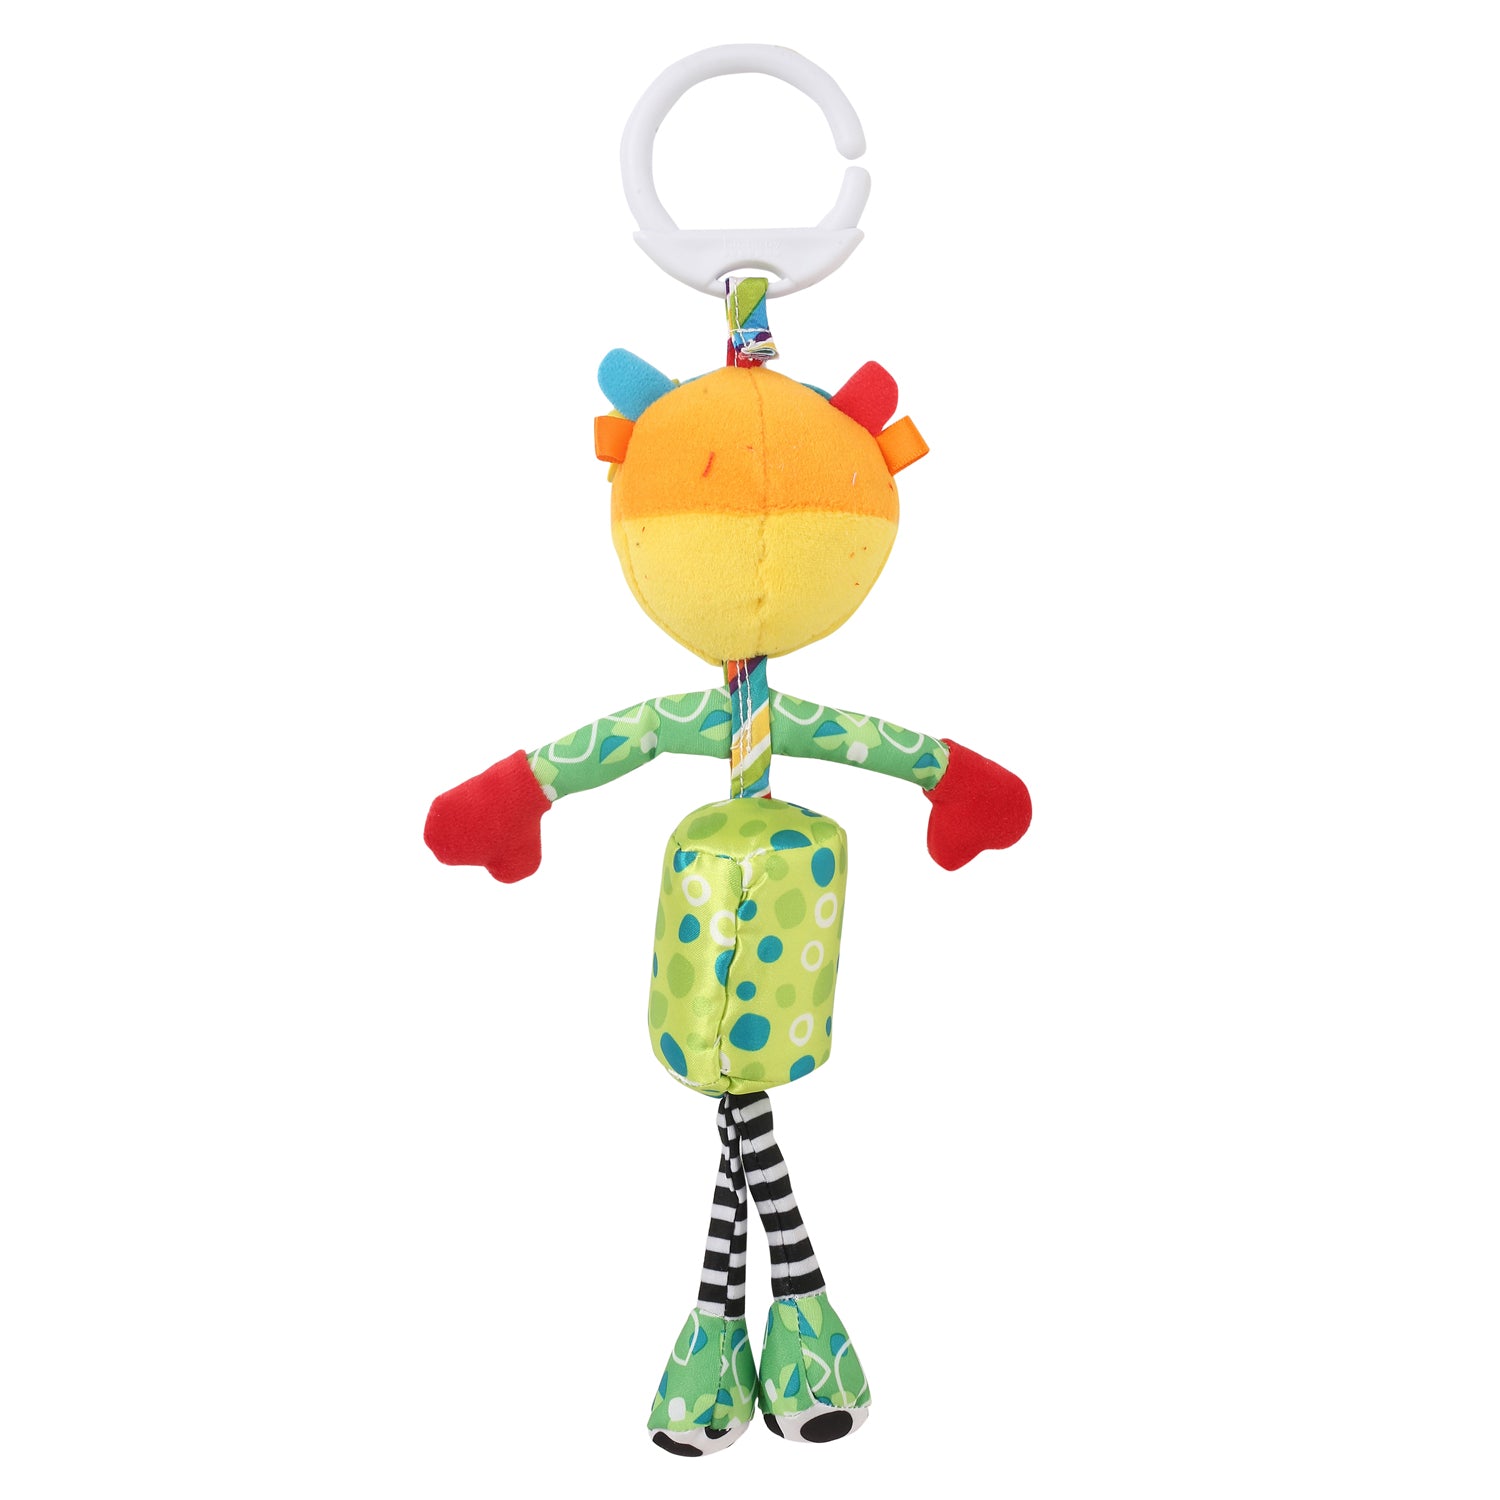 Smiling Green Hanging Musical Toy / Wind Chime Soft Rattle - Baby Moo